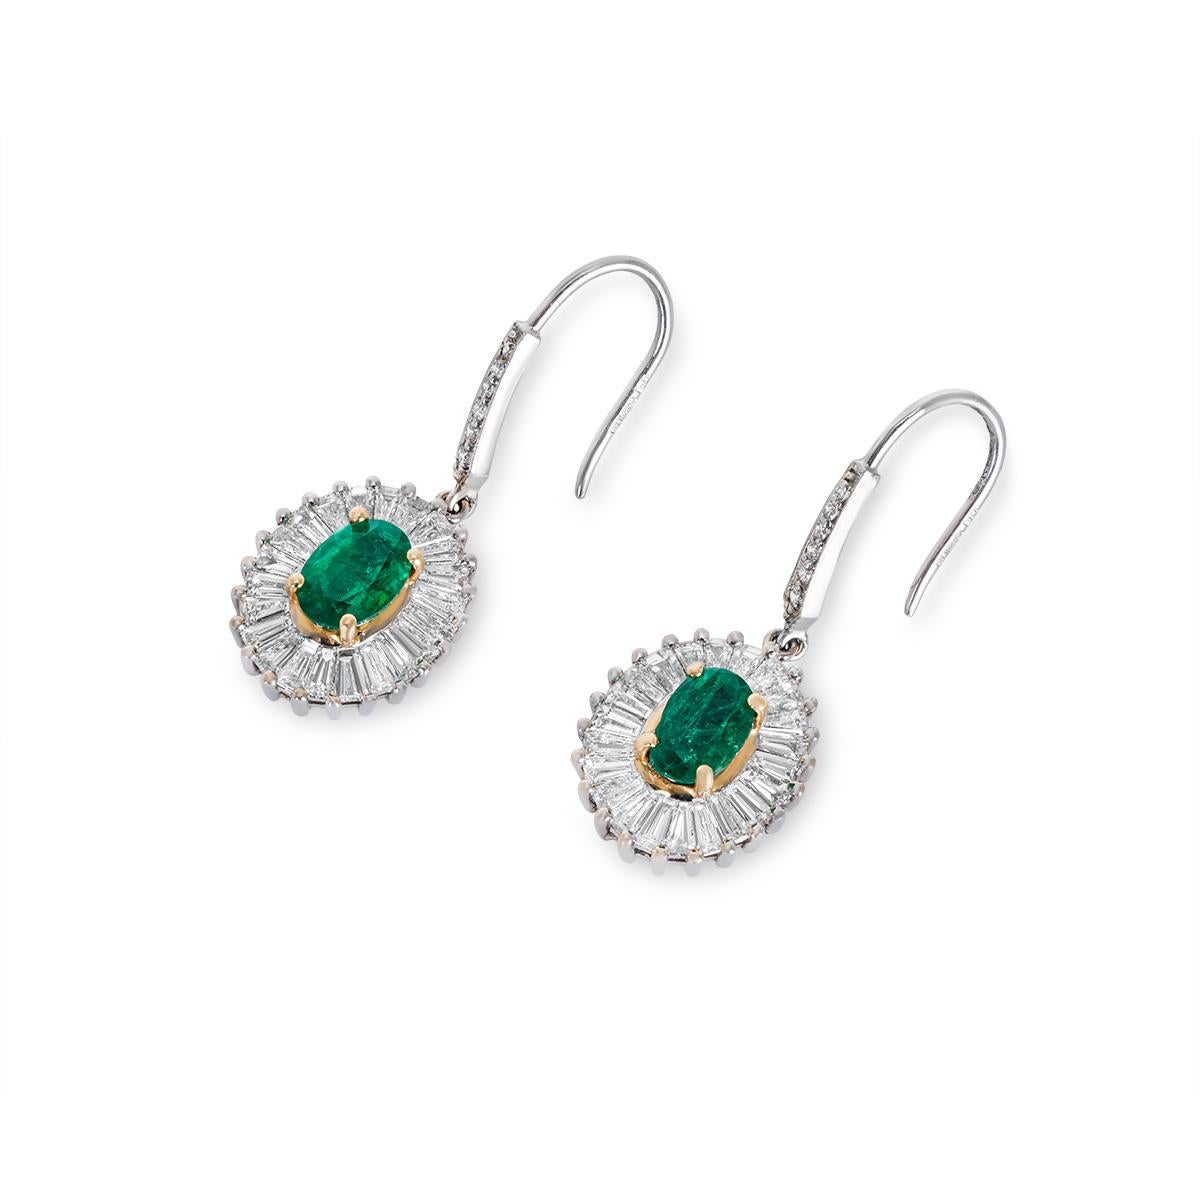 A dazzling pair of 18k white gold emerald and diamond drop earrings. The earrings highlight oval cut emeralds set to the centre with 18k yellow gold prongs with an approximate total weight of 1.63ct and displaying a vibrant green hue. Accentuating